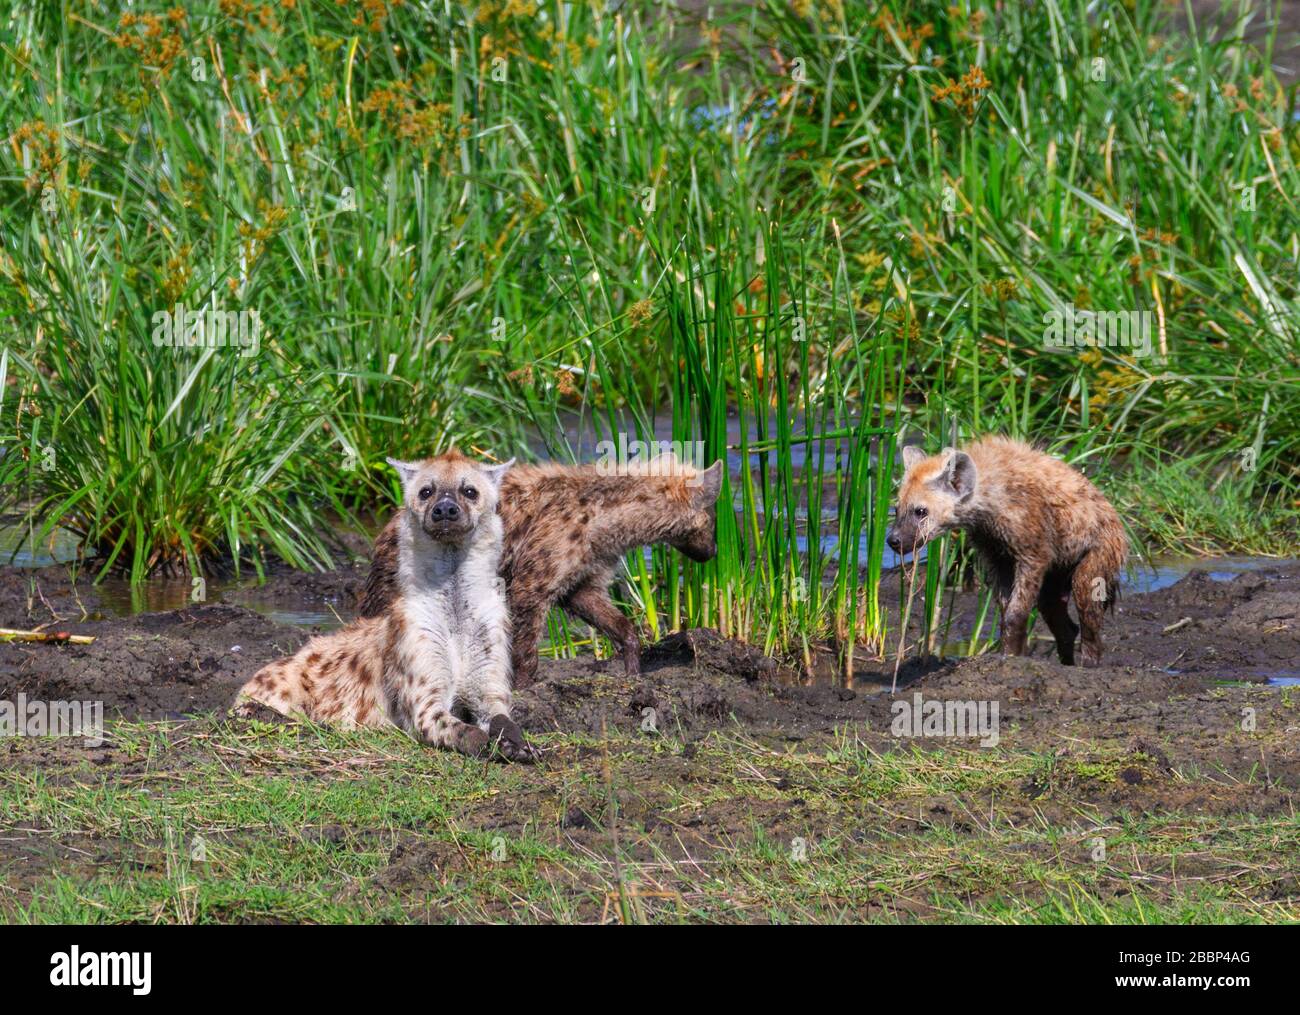 Spotted hyena (Crocuta crocuta). A family of spotted hyenas hunting for fish, Amboseli National Park, Kenya, Africa Stock Photo